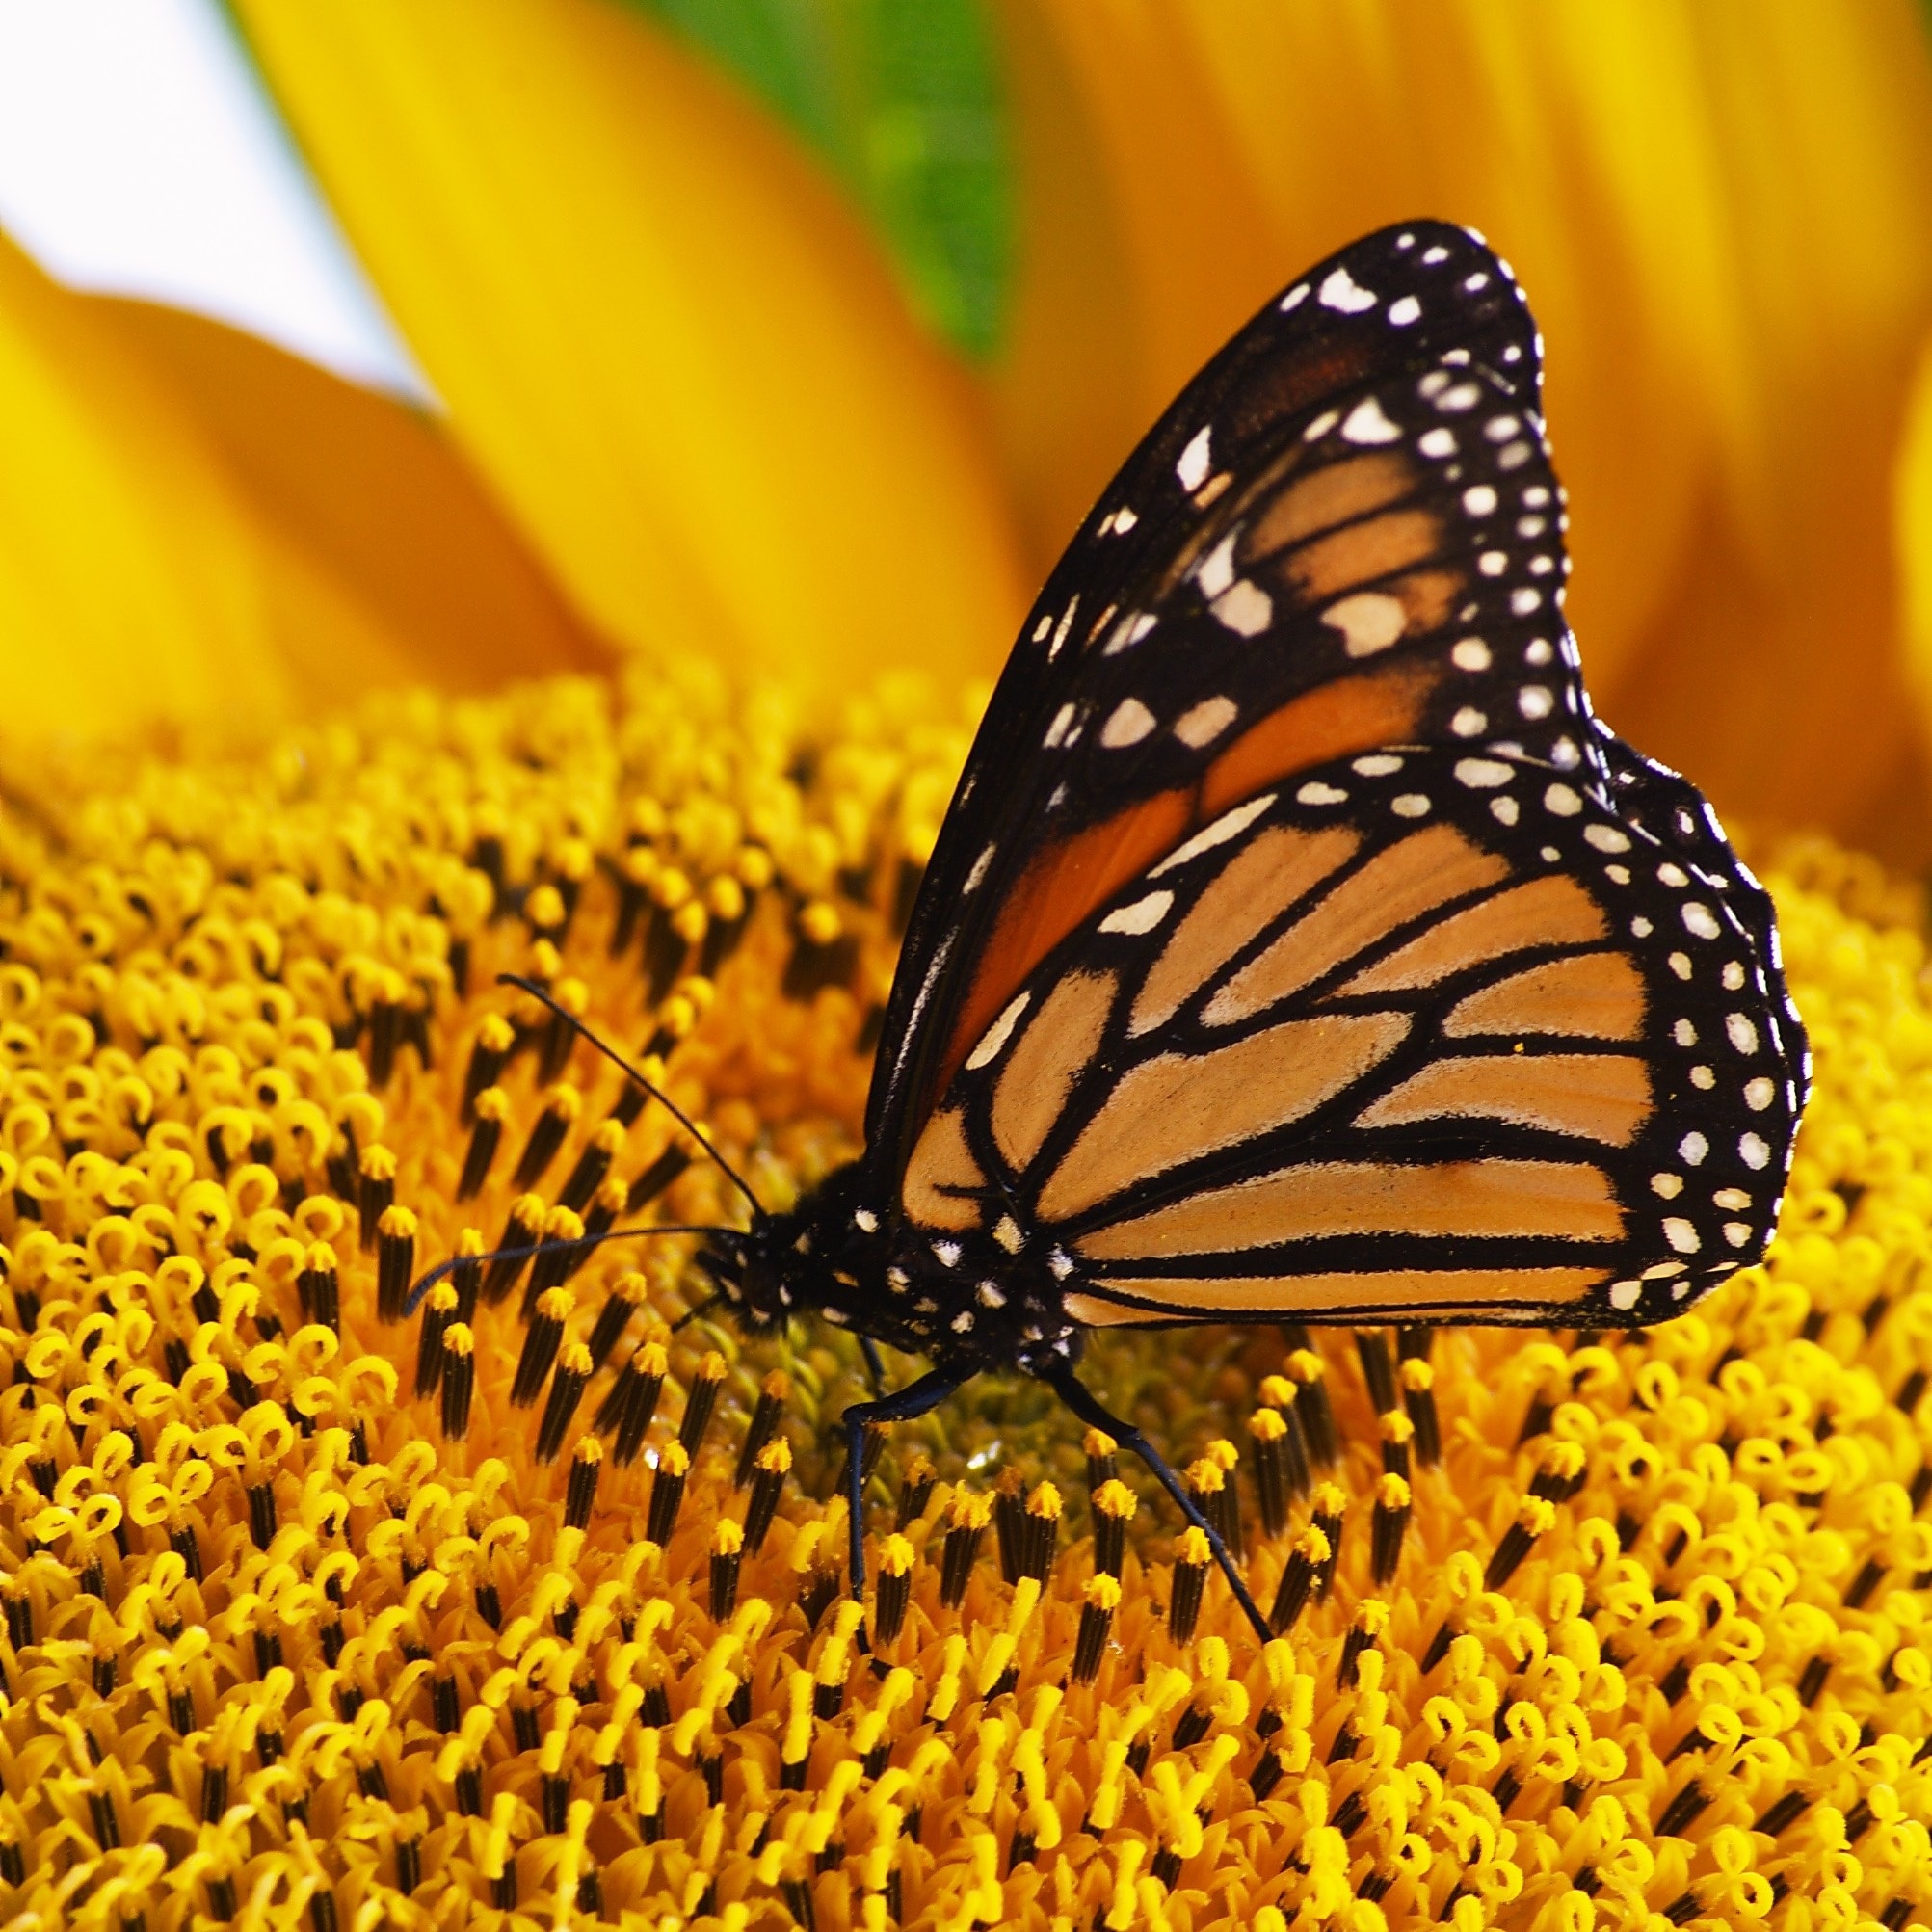 Monarch butterfly on sunflower during daytime